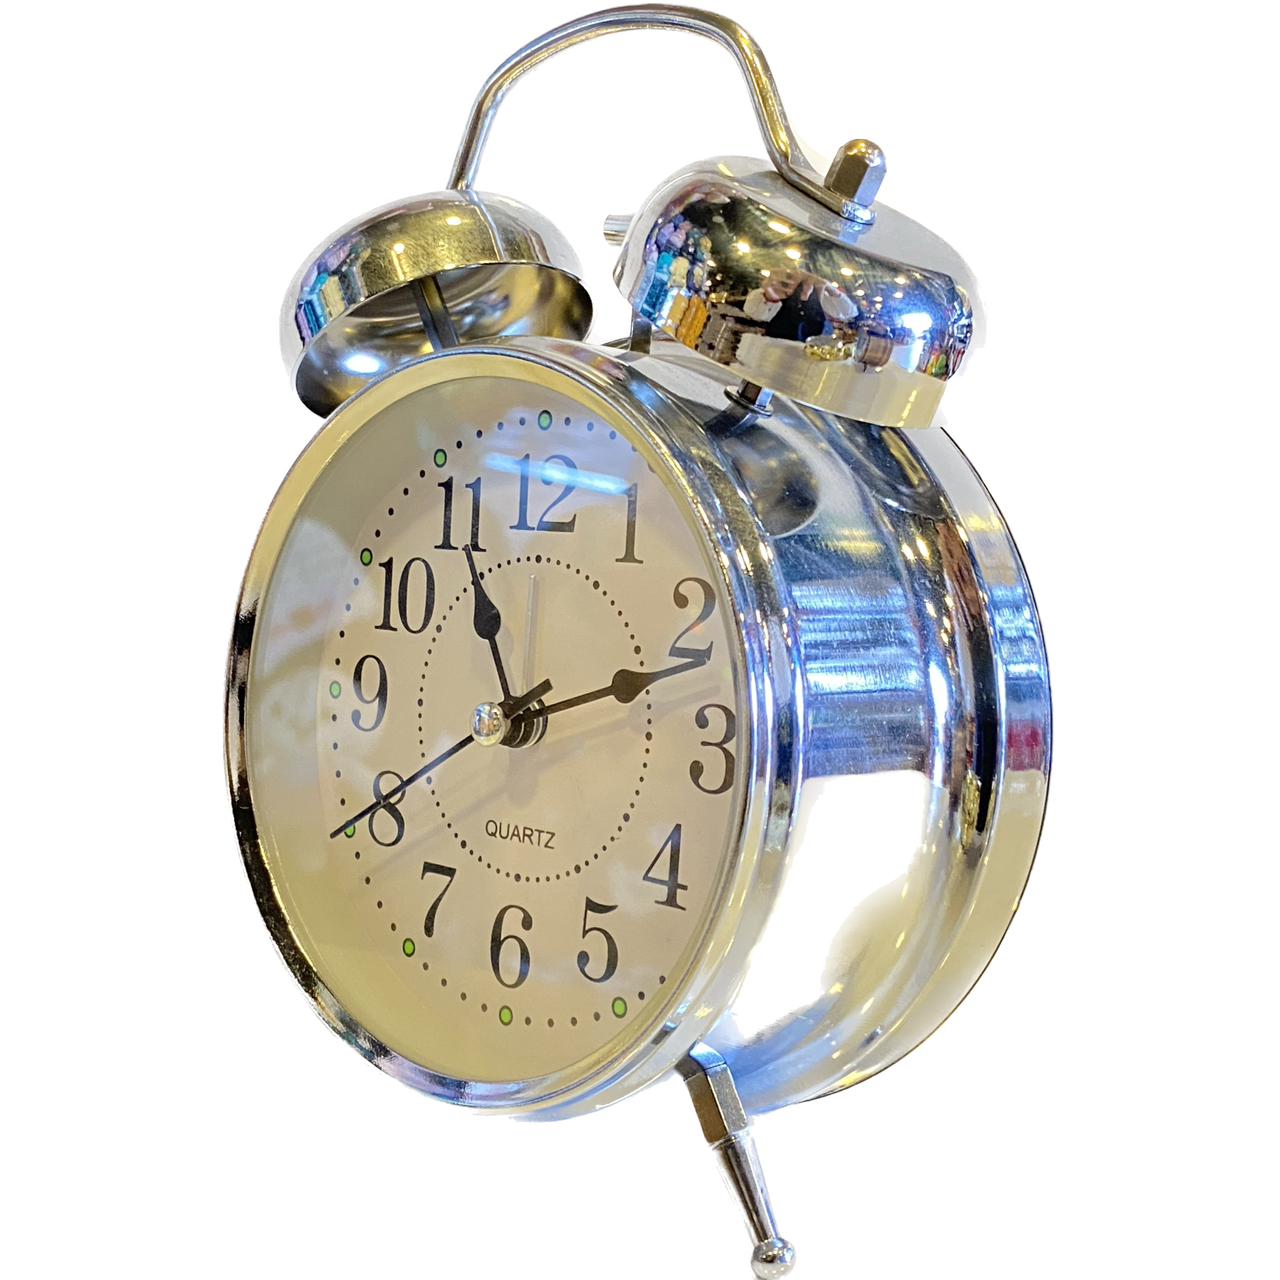 Metallic 4 Inch Alarm Analogue Clock with Twin Bell